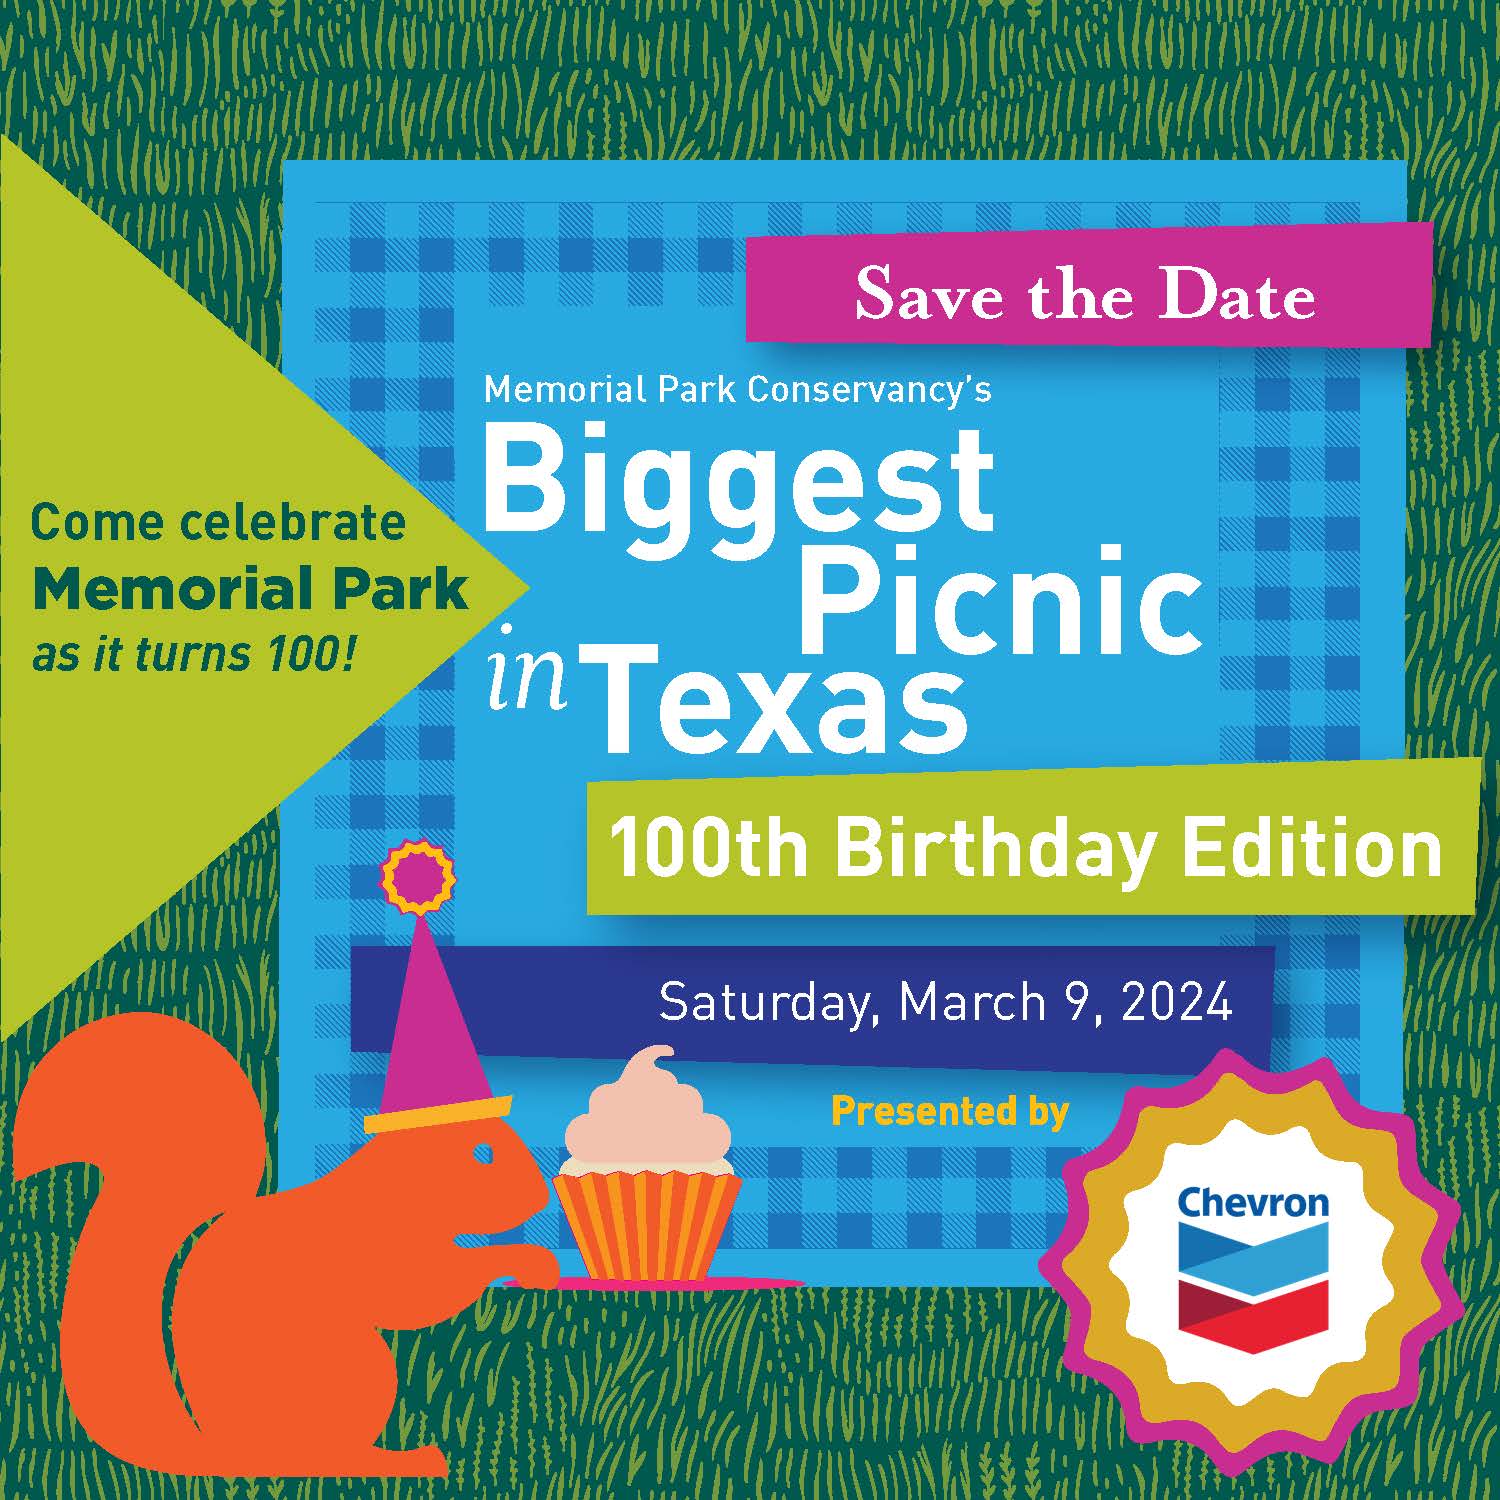 The Biggest Picnic in Texas: 100th Birthday Edition at Memorial Park 2024